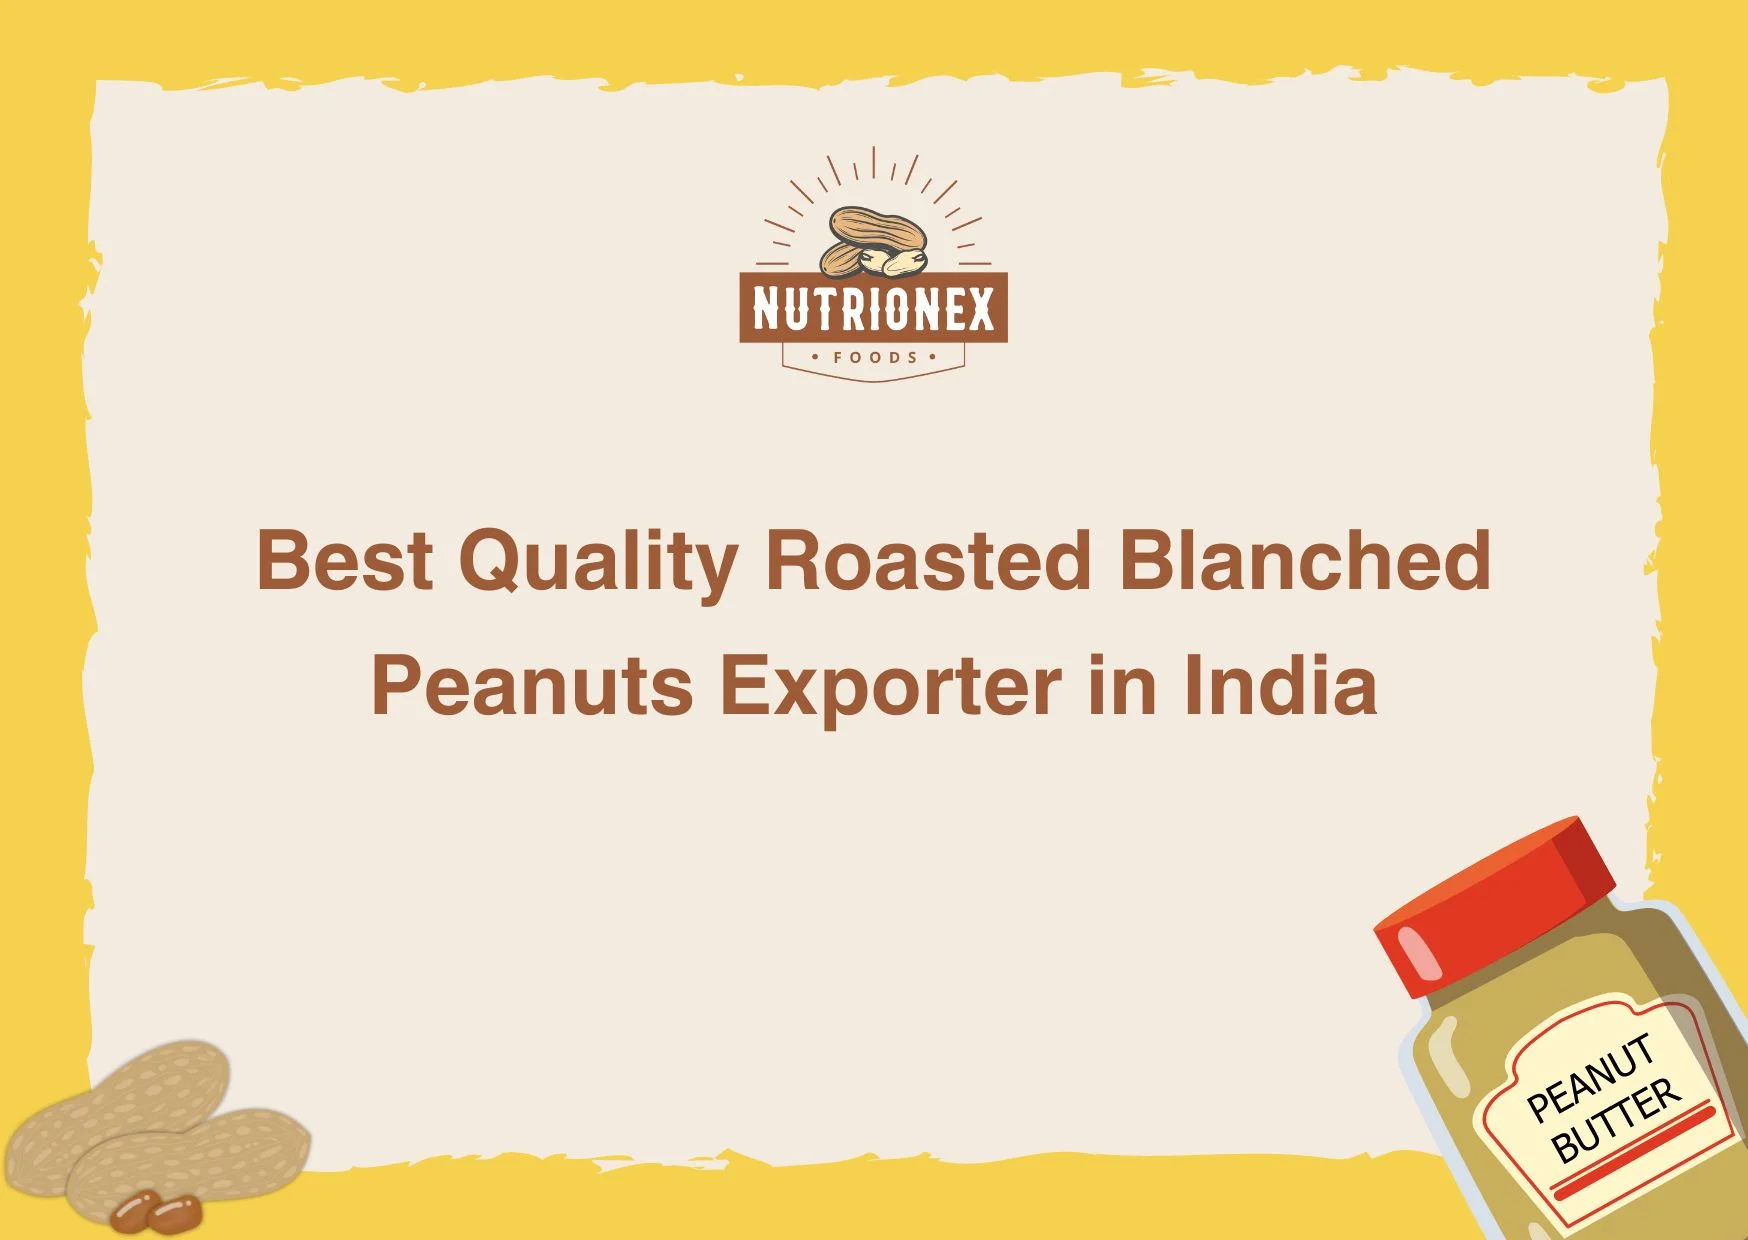 Best Quality Roasted Blanched Peanuts Exporter In India